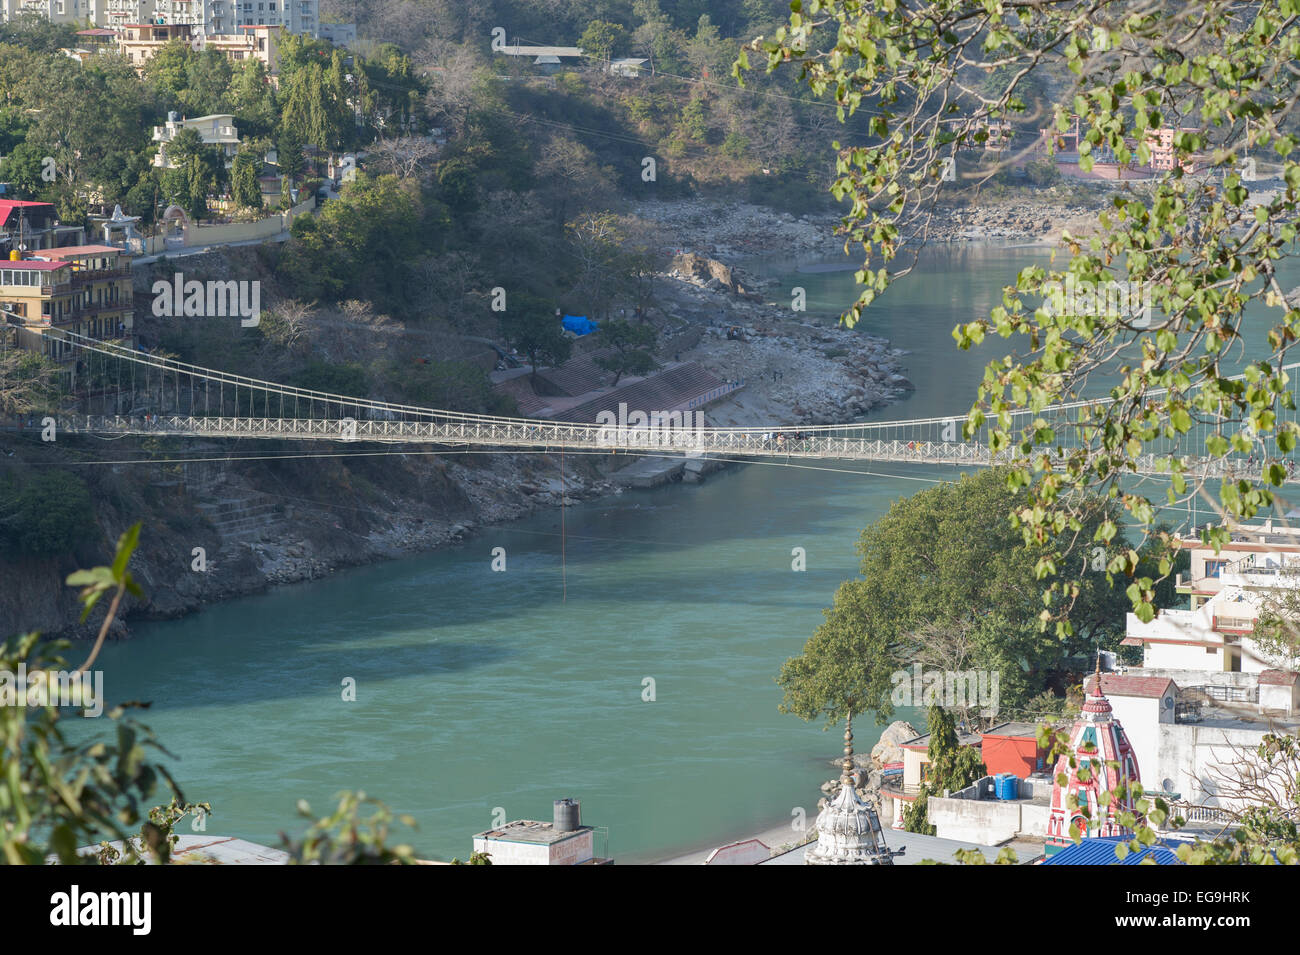 Looking down at Lakshman Jhula bridge which crosses the Ganges or Ganga river in the town of Rishikesh, Uttarakhand, India Stock Photo